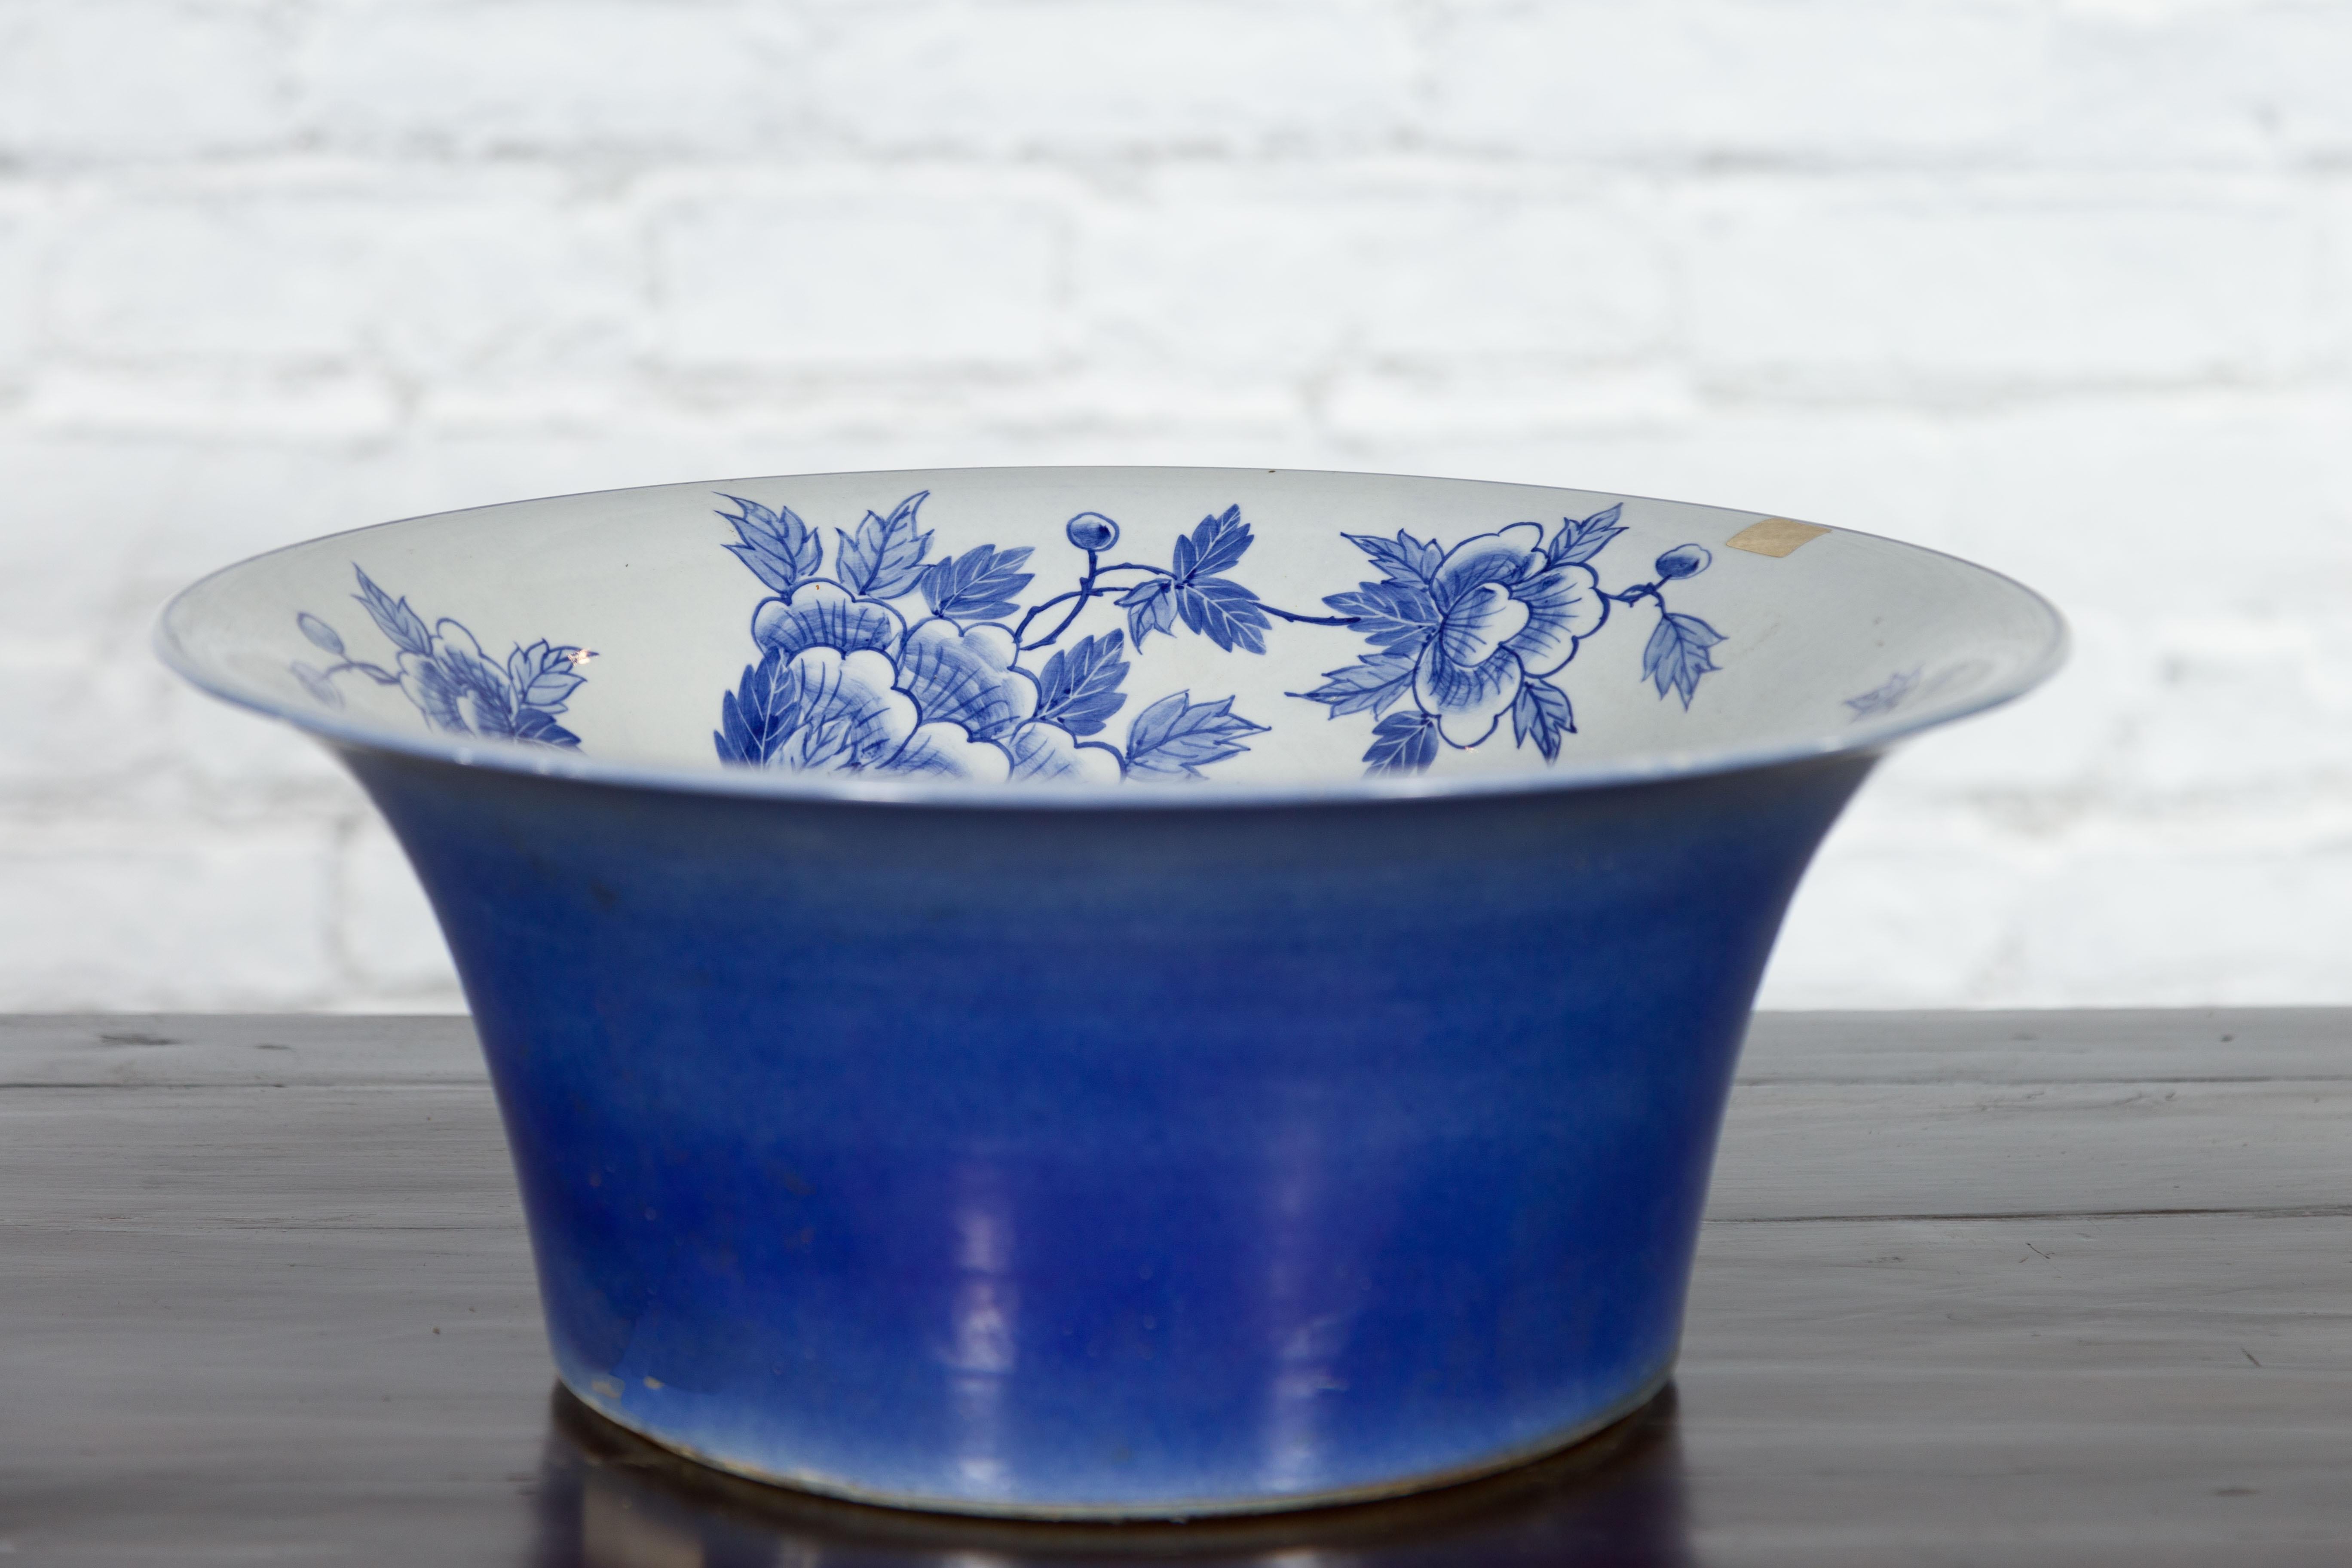 Chinese Blue and White Porcelain Wash Basin with Floral Motifs and Cobalt Blue For Sale 6